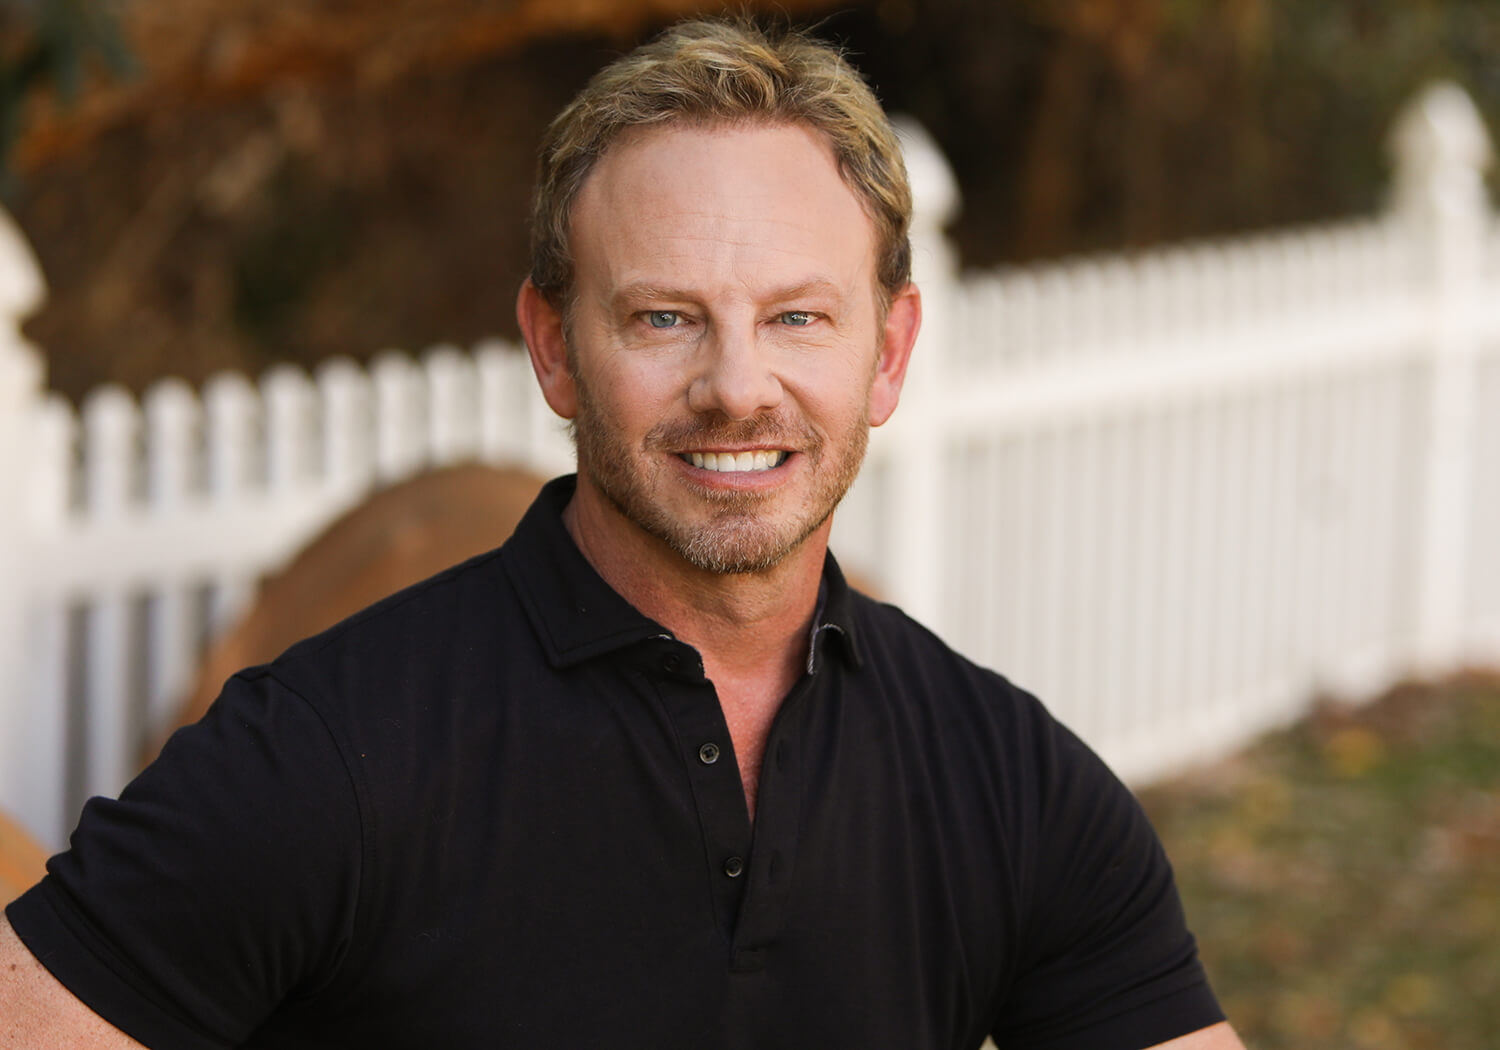 Ian Ziering poses in a black shirt at Hallmark Channel's Home & Family at Universal Studios Hollywood